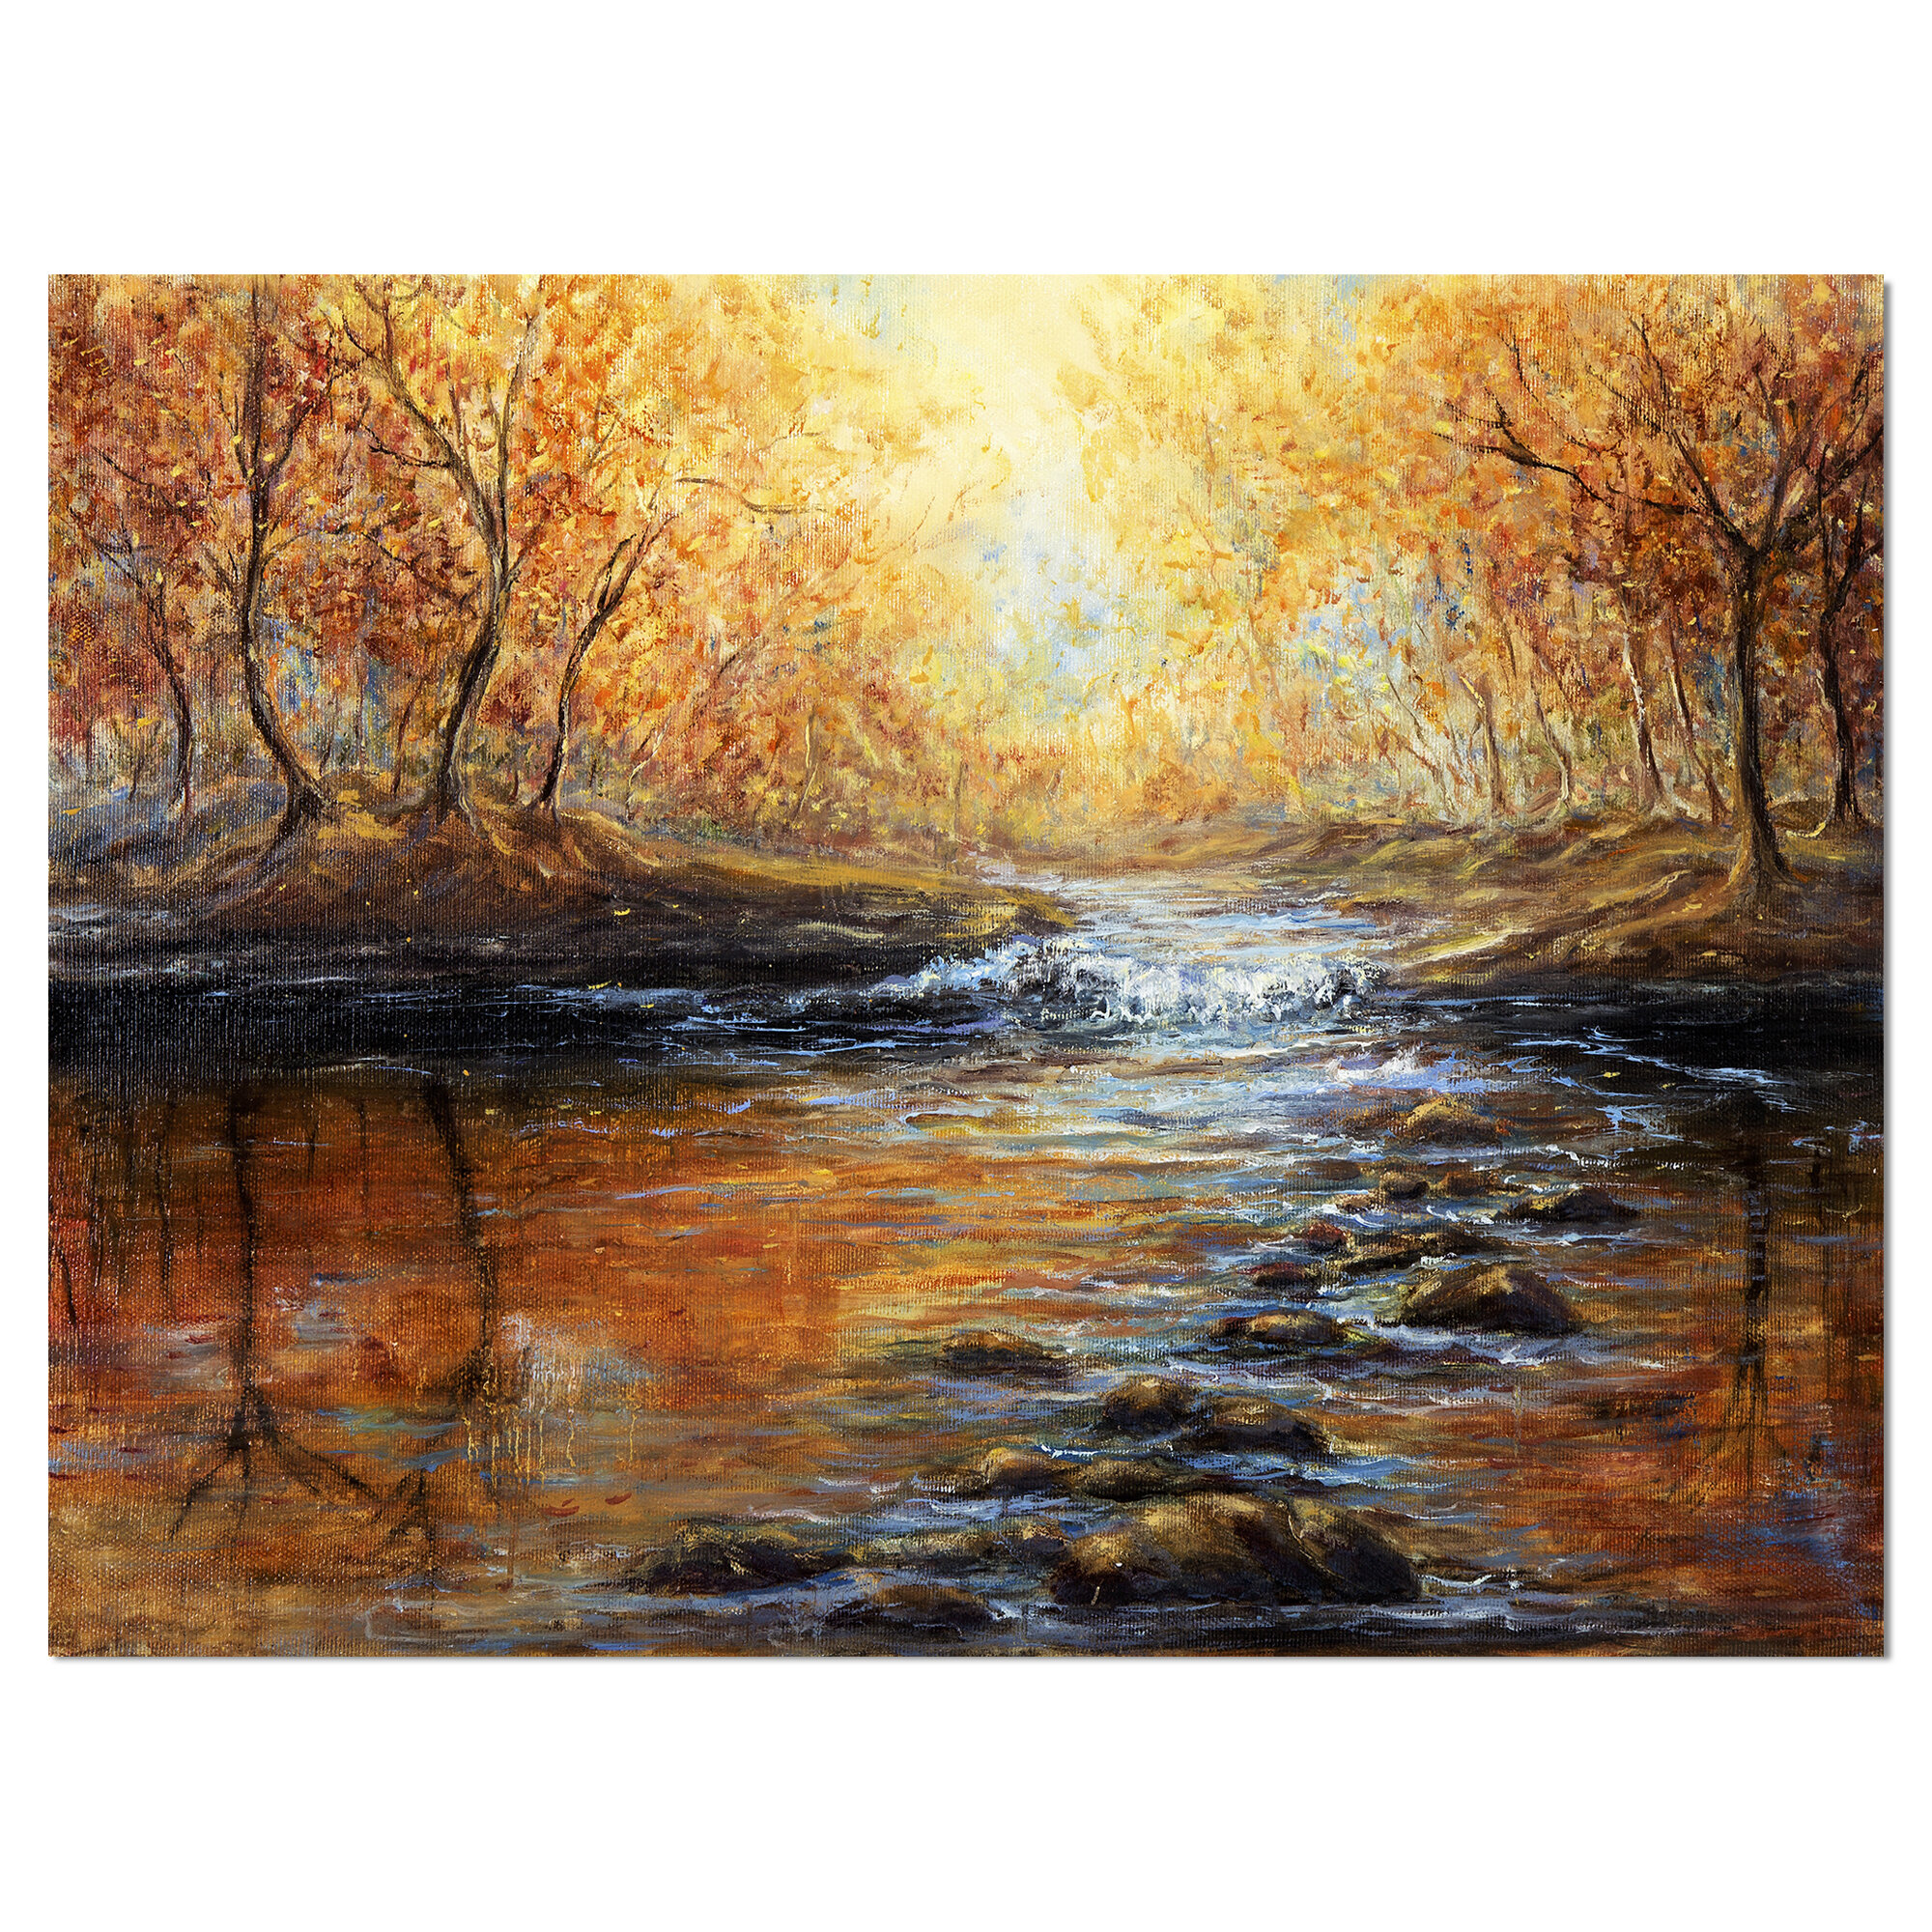 East Urban Home Landscapes Autumn Forest And River In Sunset Print On Wrapped Canvas Wayfair